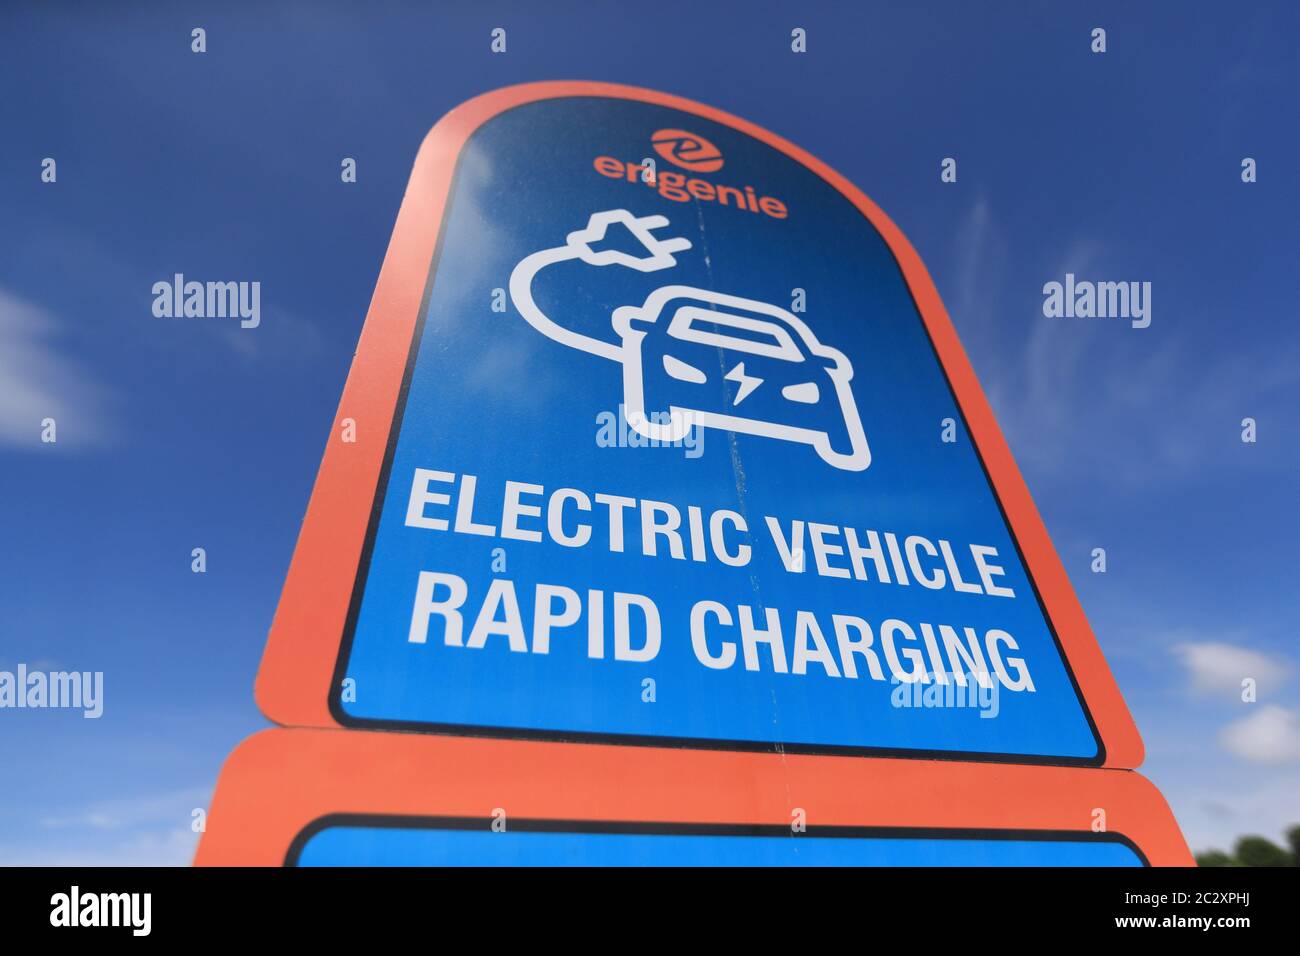 Engenie electric vehicle rapid charging point Stock Photo